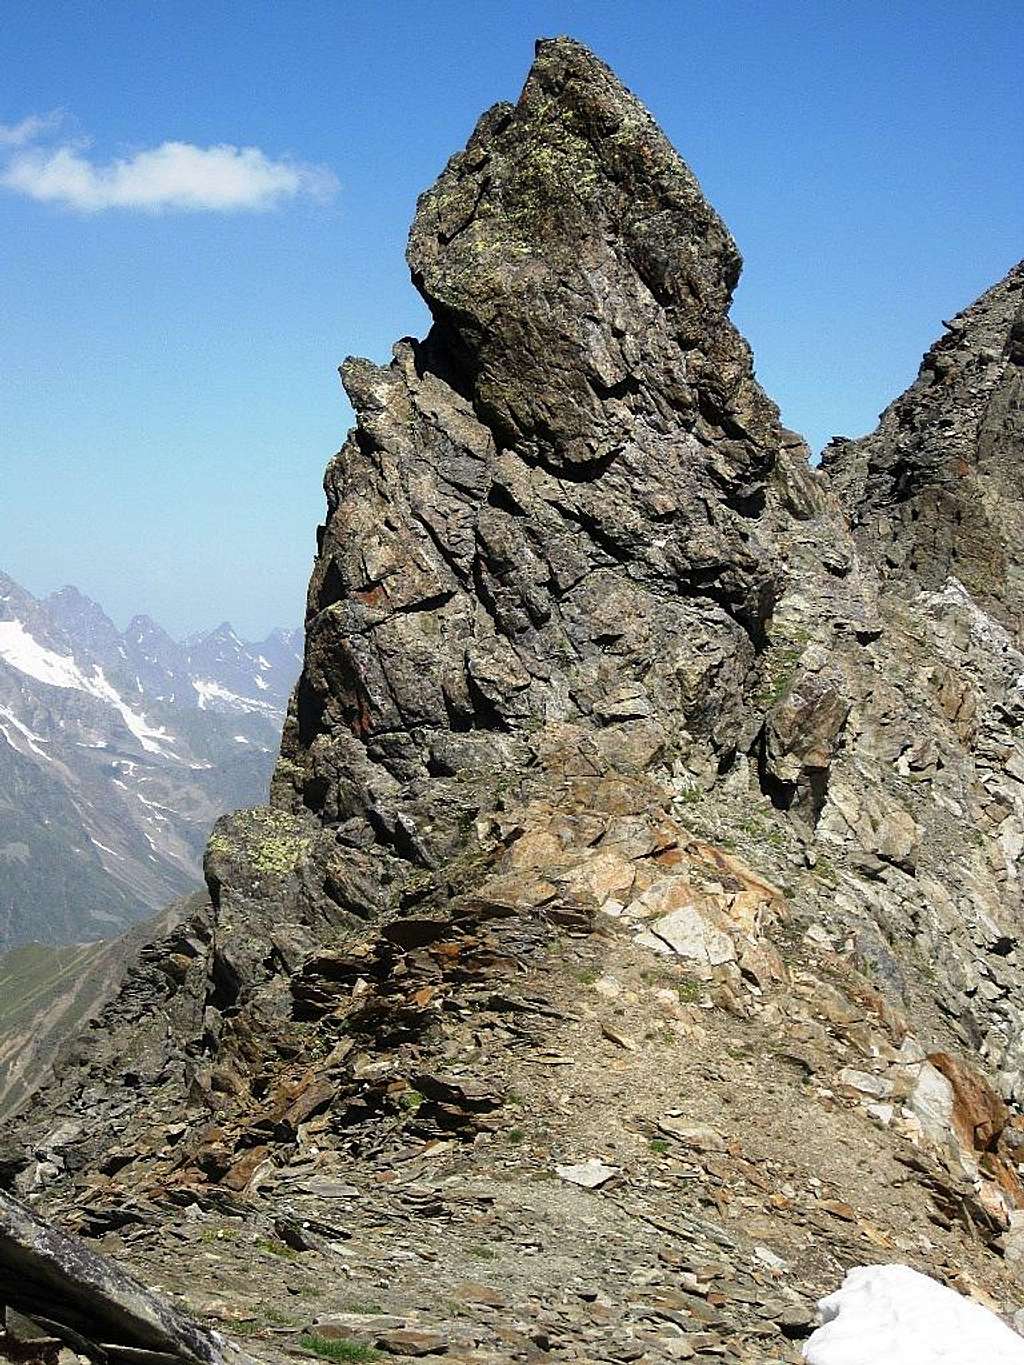 A rocky outcrop on the ridge just north of the Weißmaurachjoch